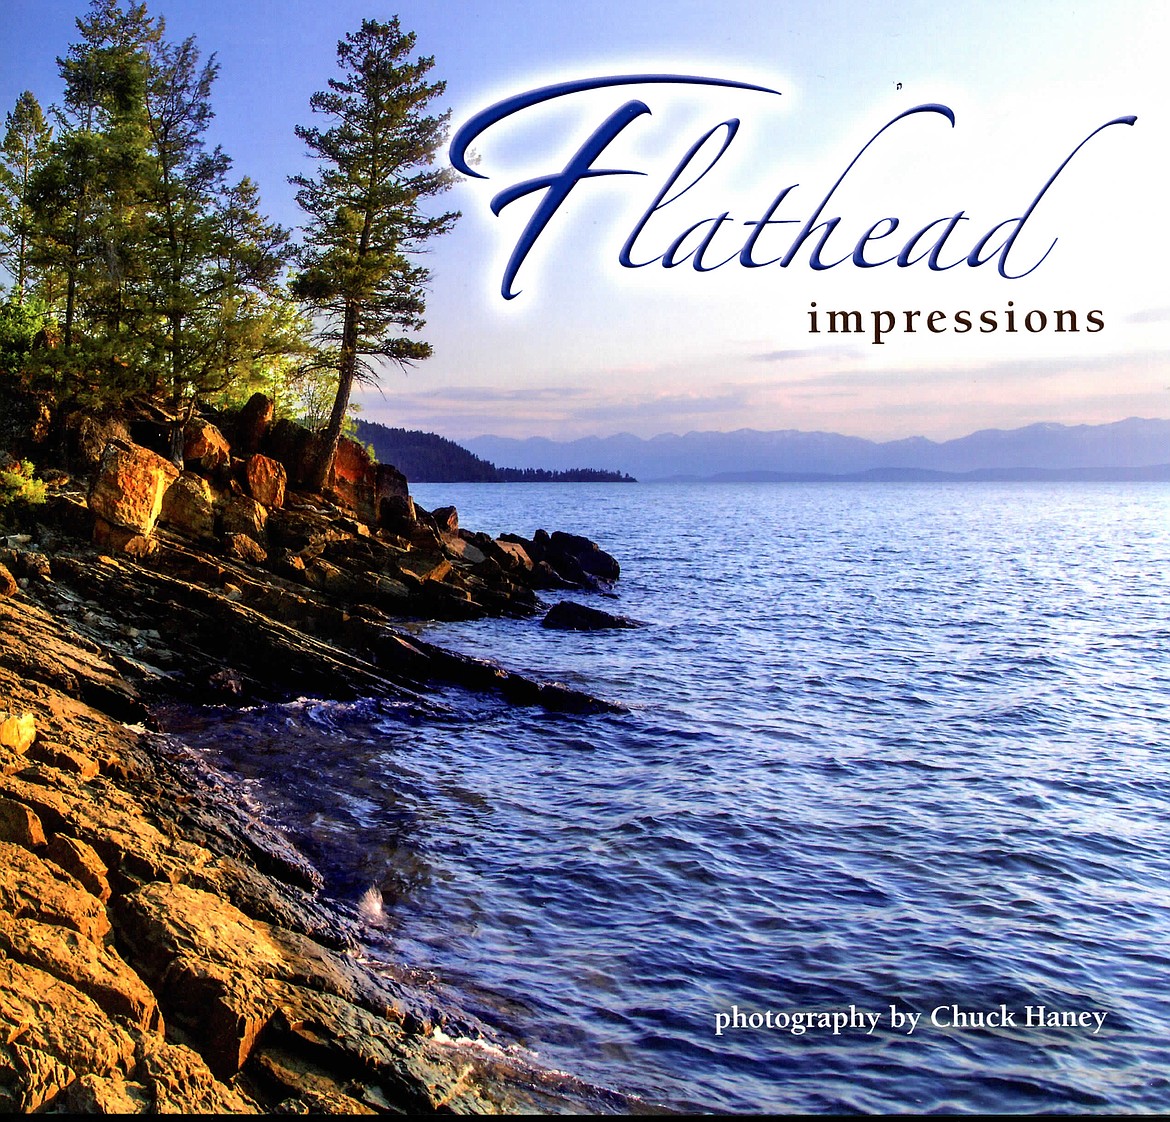 The cover of Chuck Haney&#146;s new book &#147;Flathead Impressions.&#148;